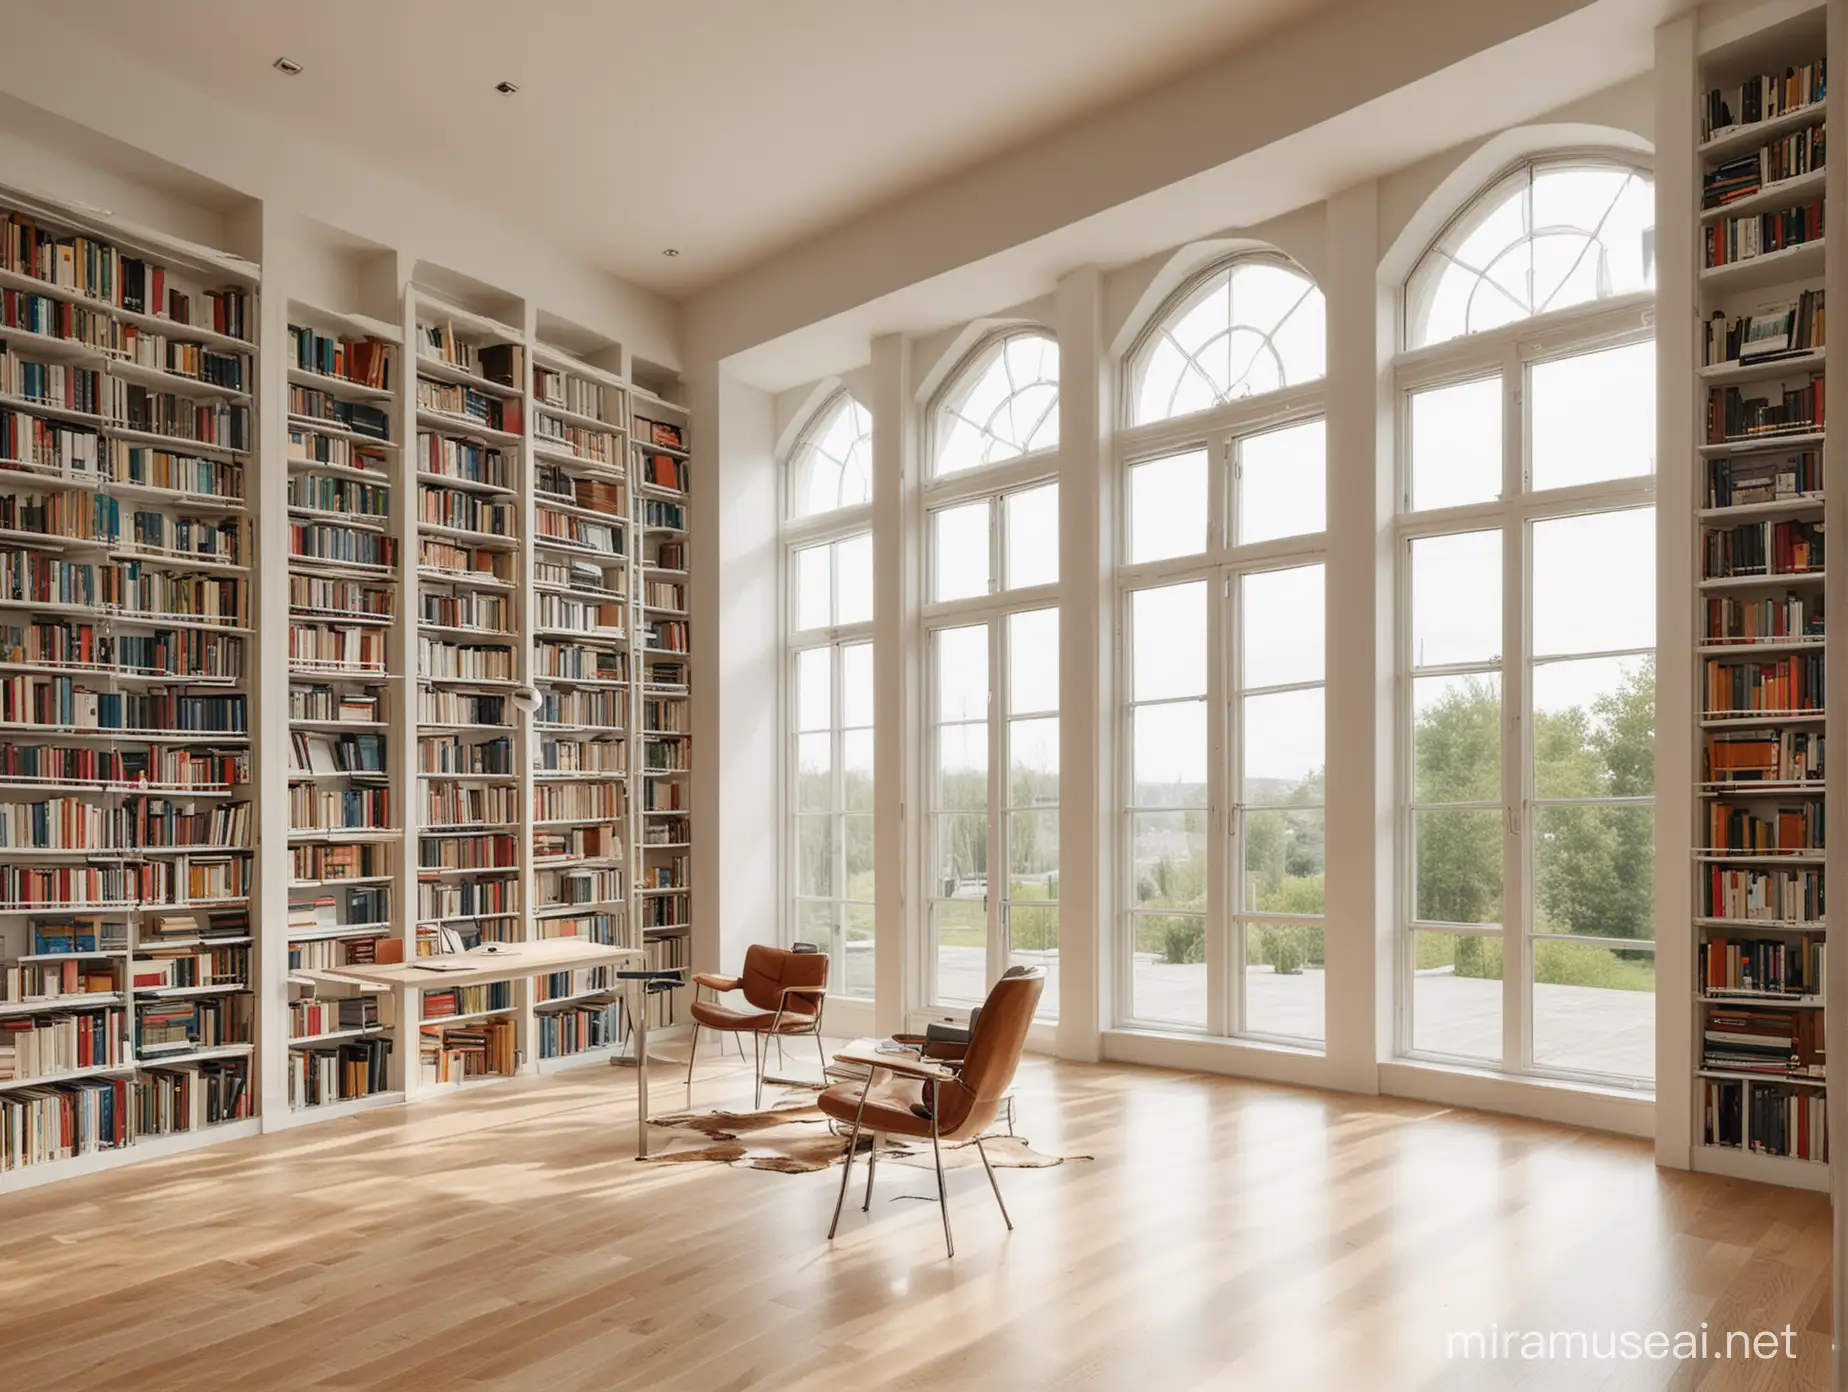 Bright Library with Large Windows and Books